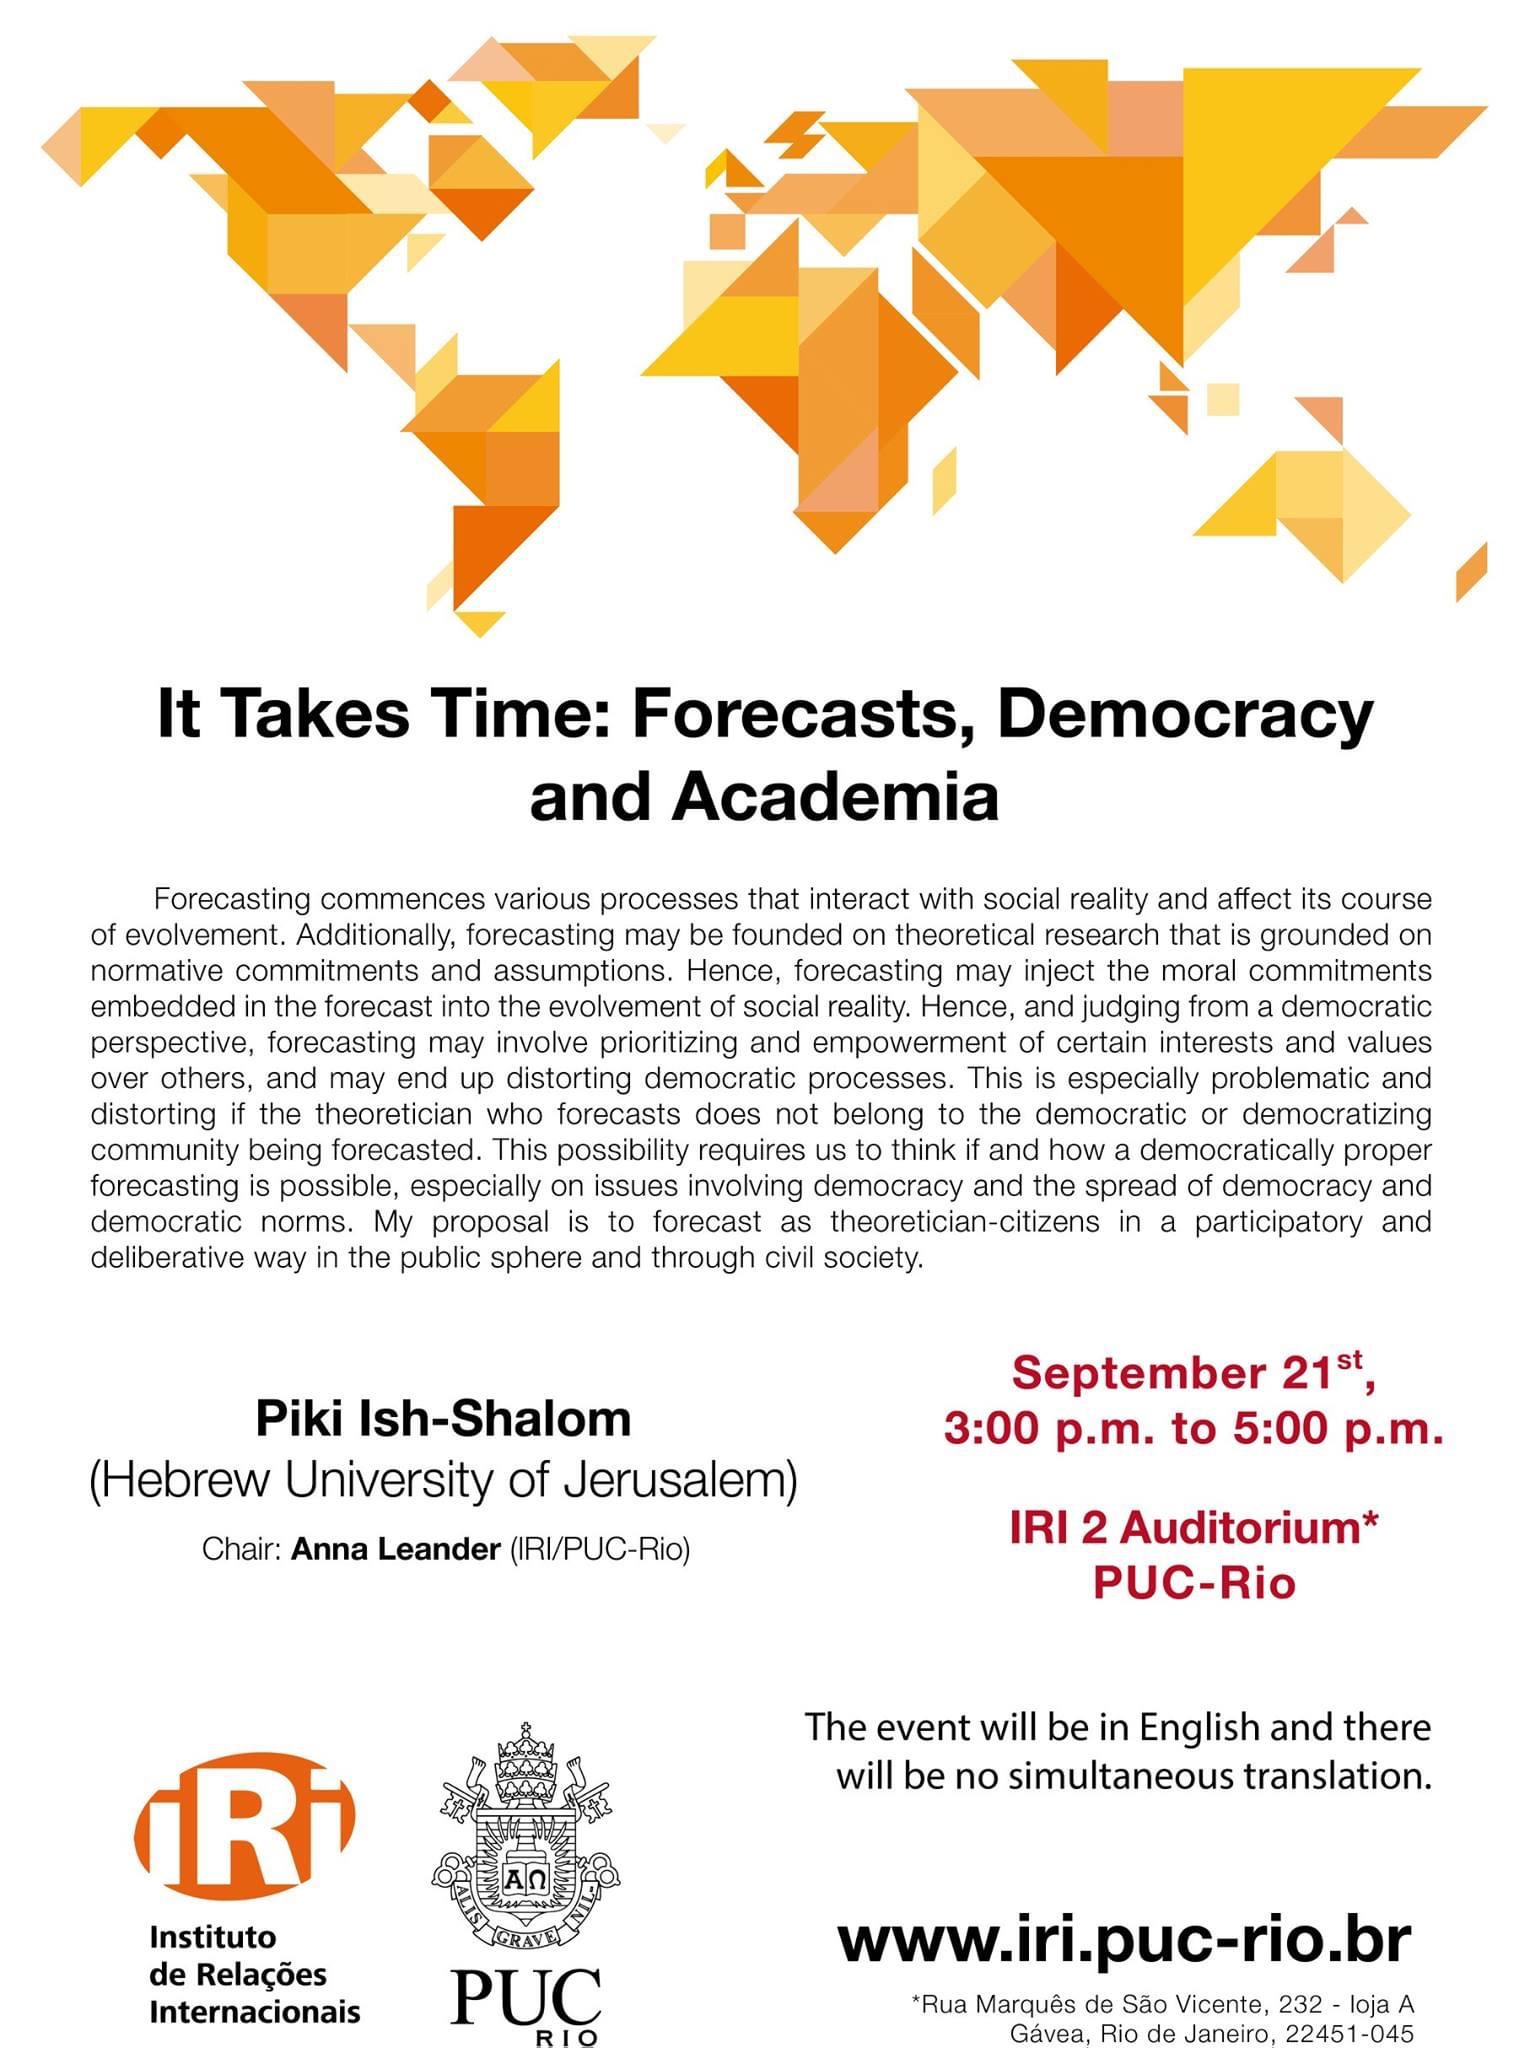 It Takes Time: Forecasts, Democracy and Academia